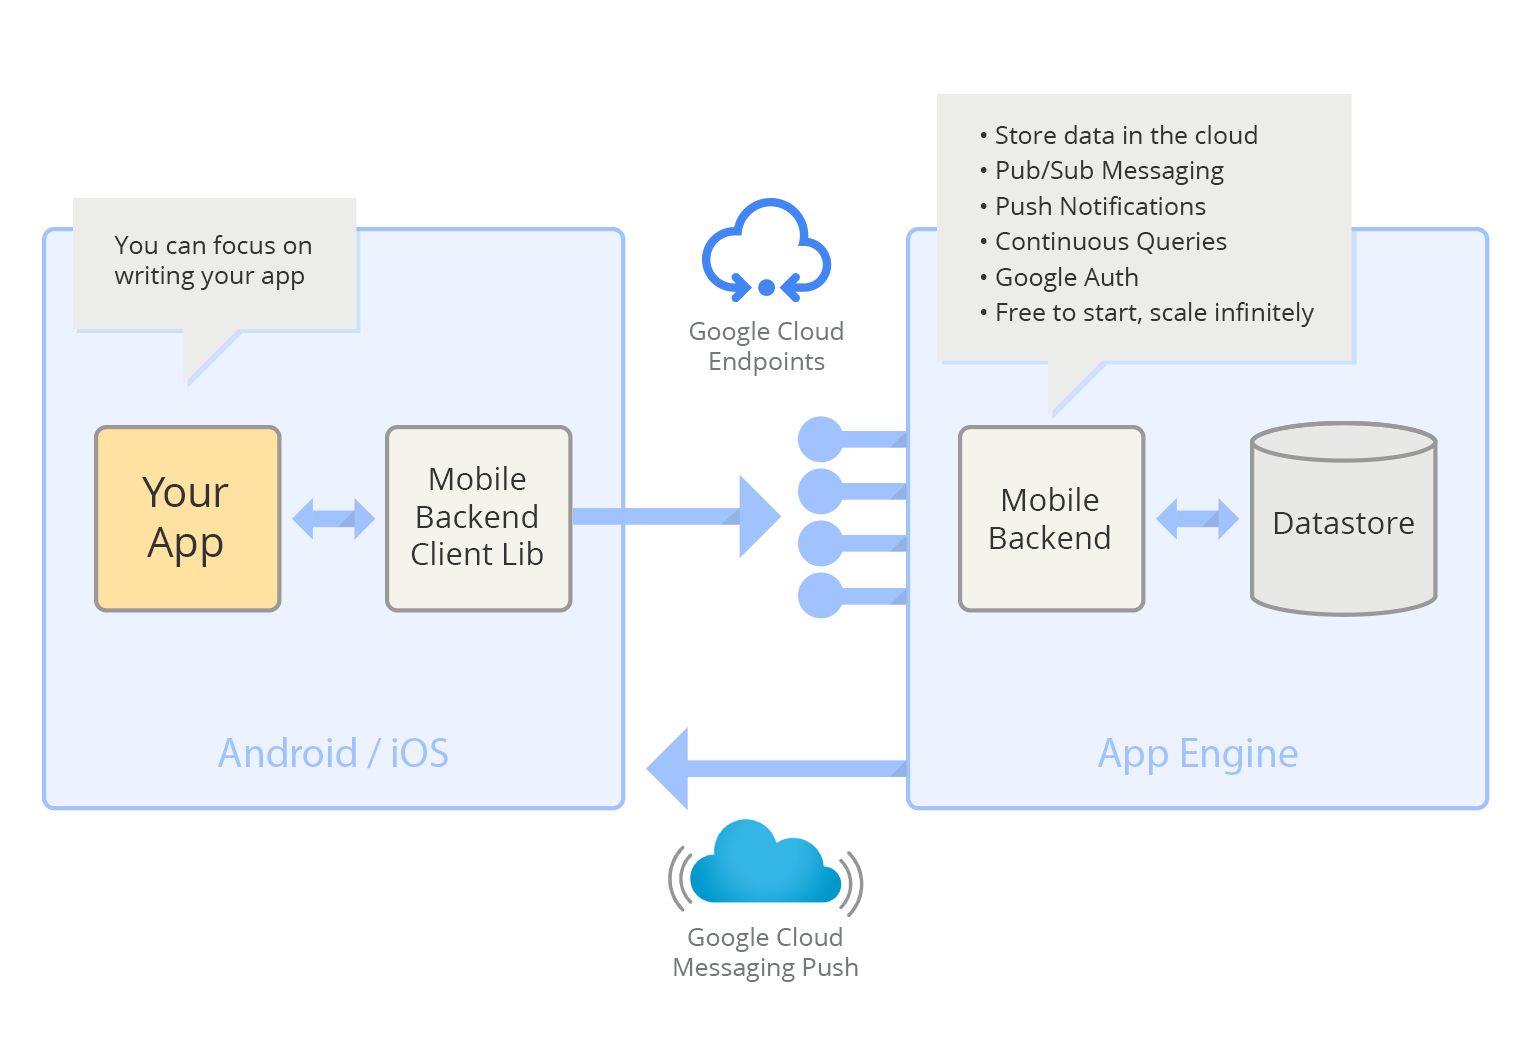 Google Launches Cloud Based Backend Tools for iOS App Developers